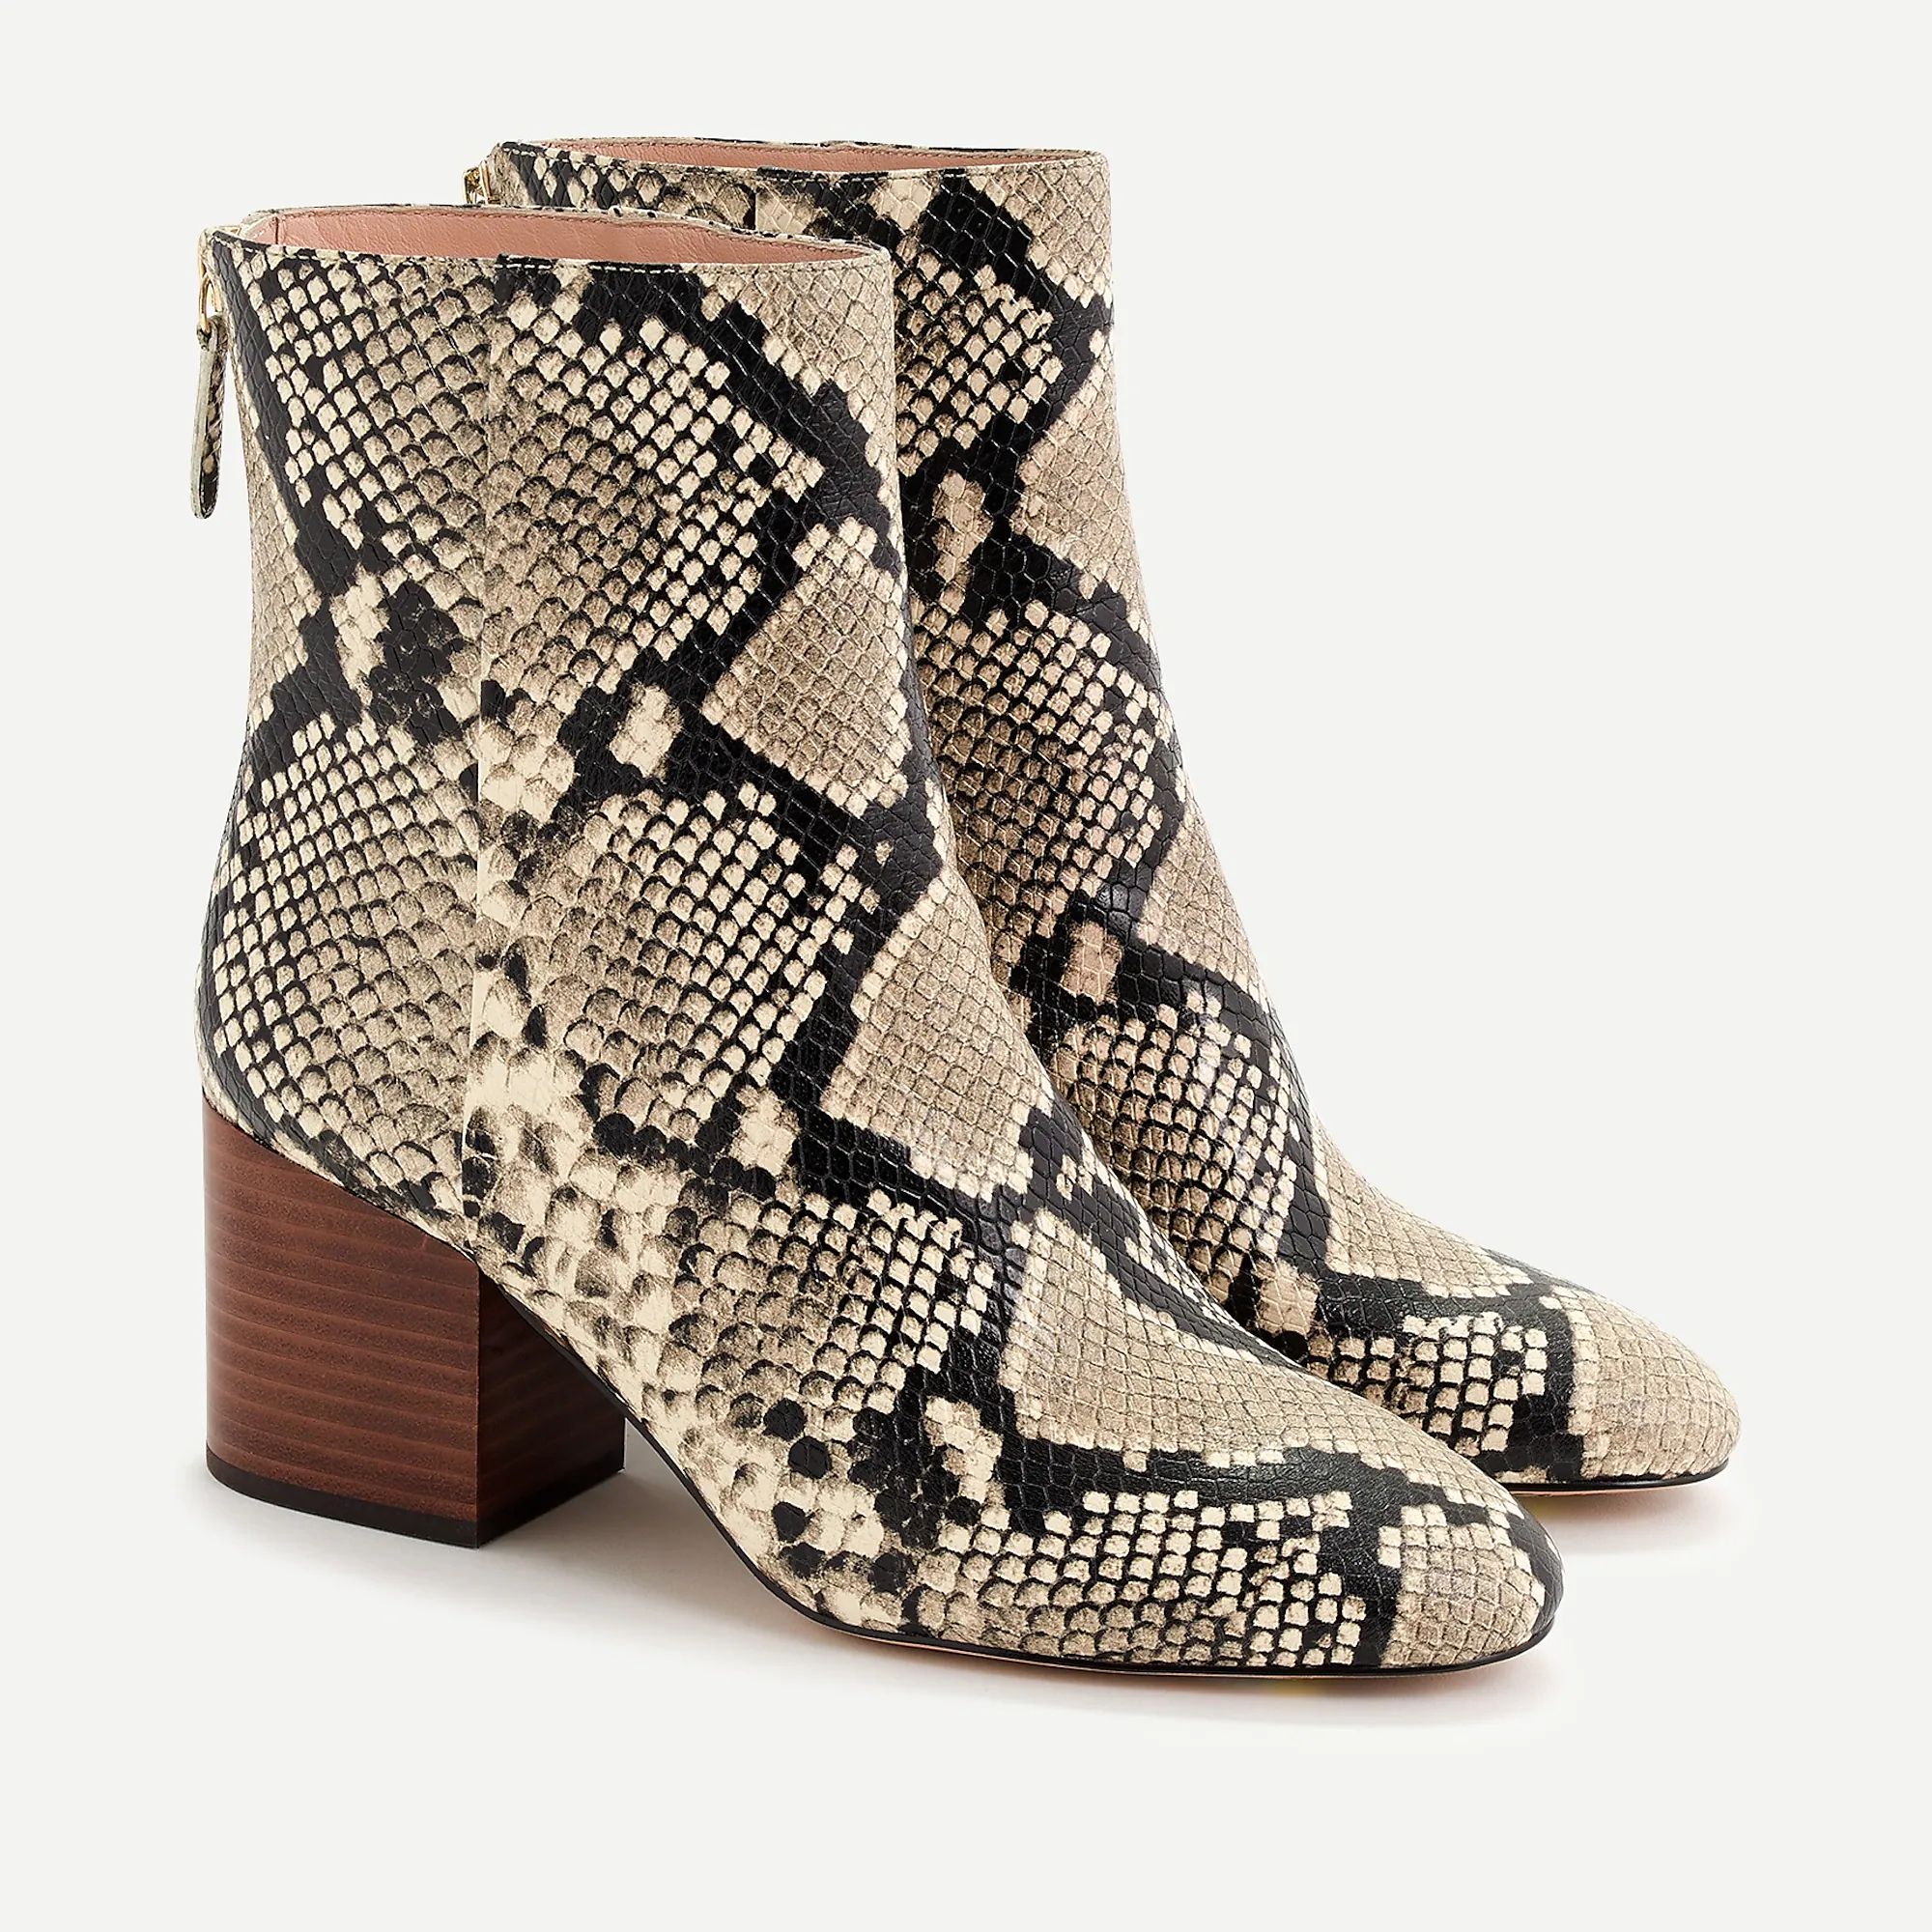 Sadie boots in snake-embossed leather | J.Crew US